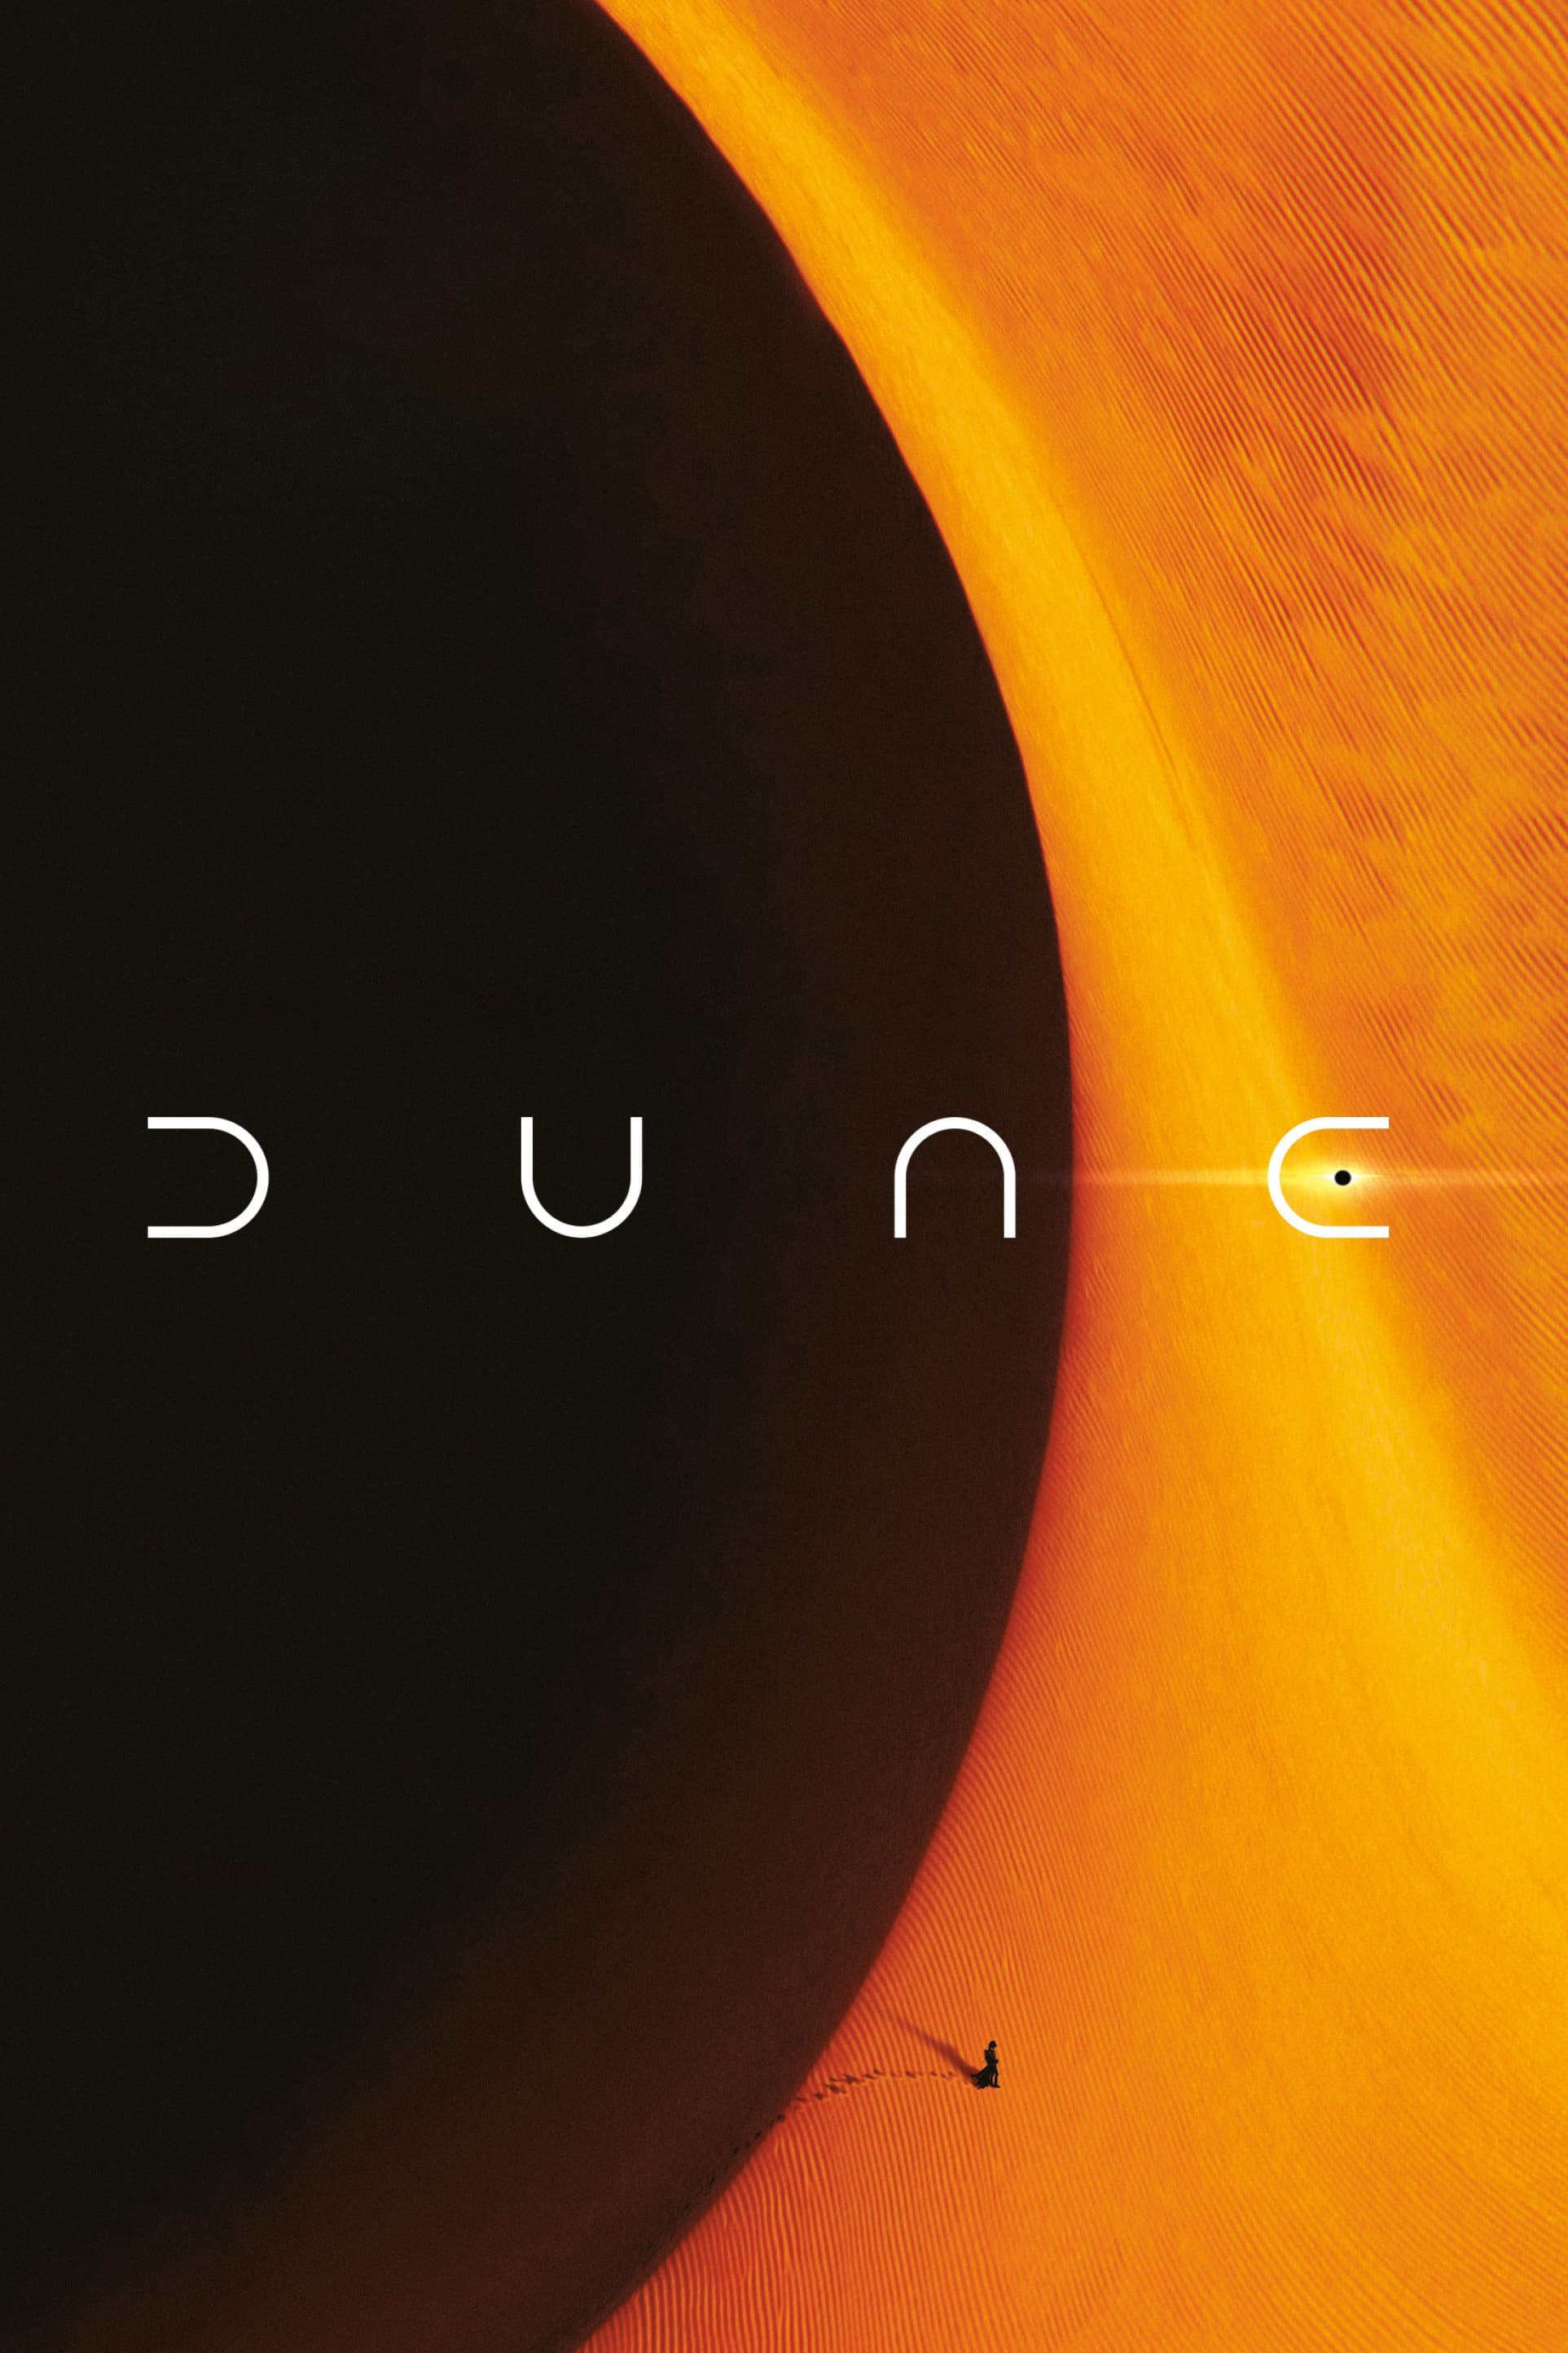 New Dune HD 2021 Movie Wallpaper, HD Movies 4K Wallpapers, Images and  Background - Wallpapers Den